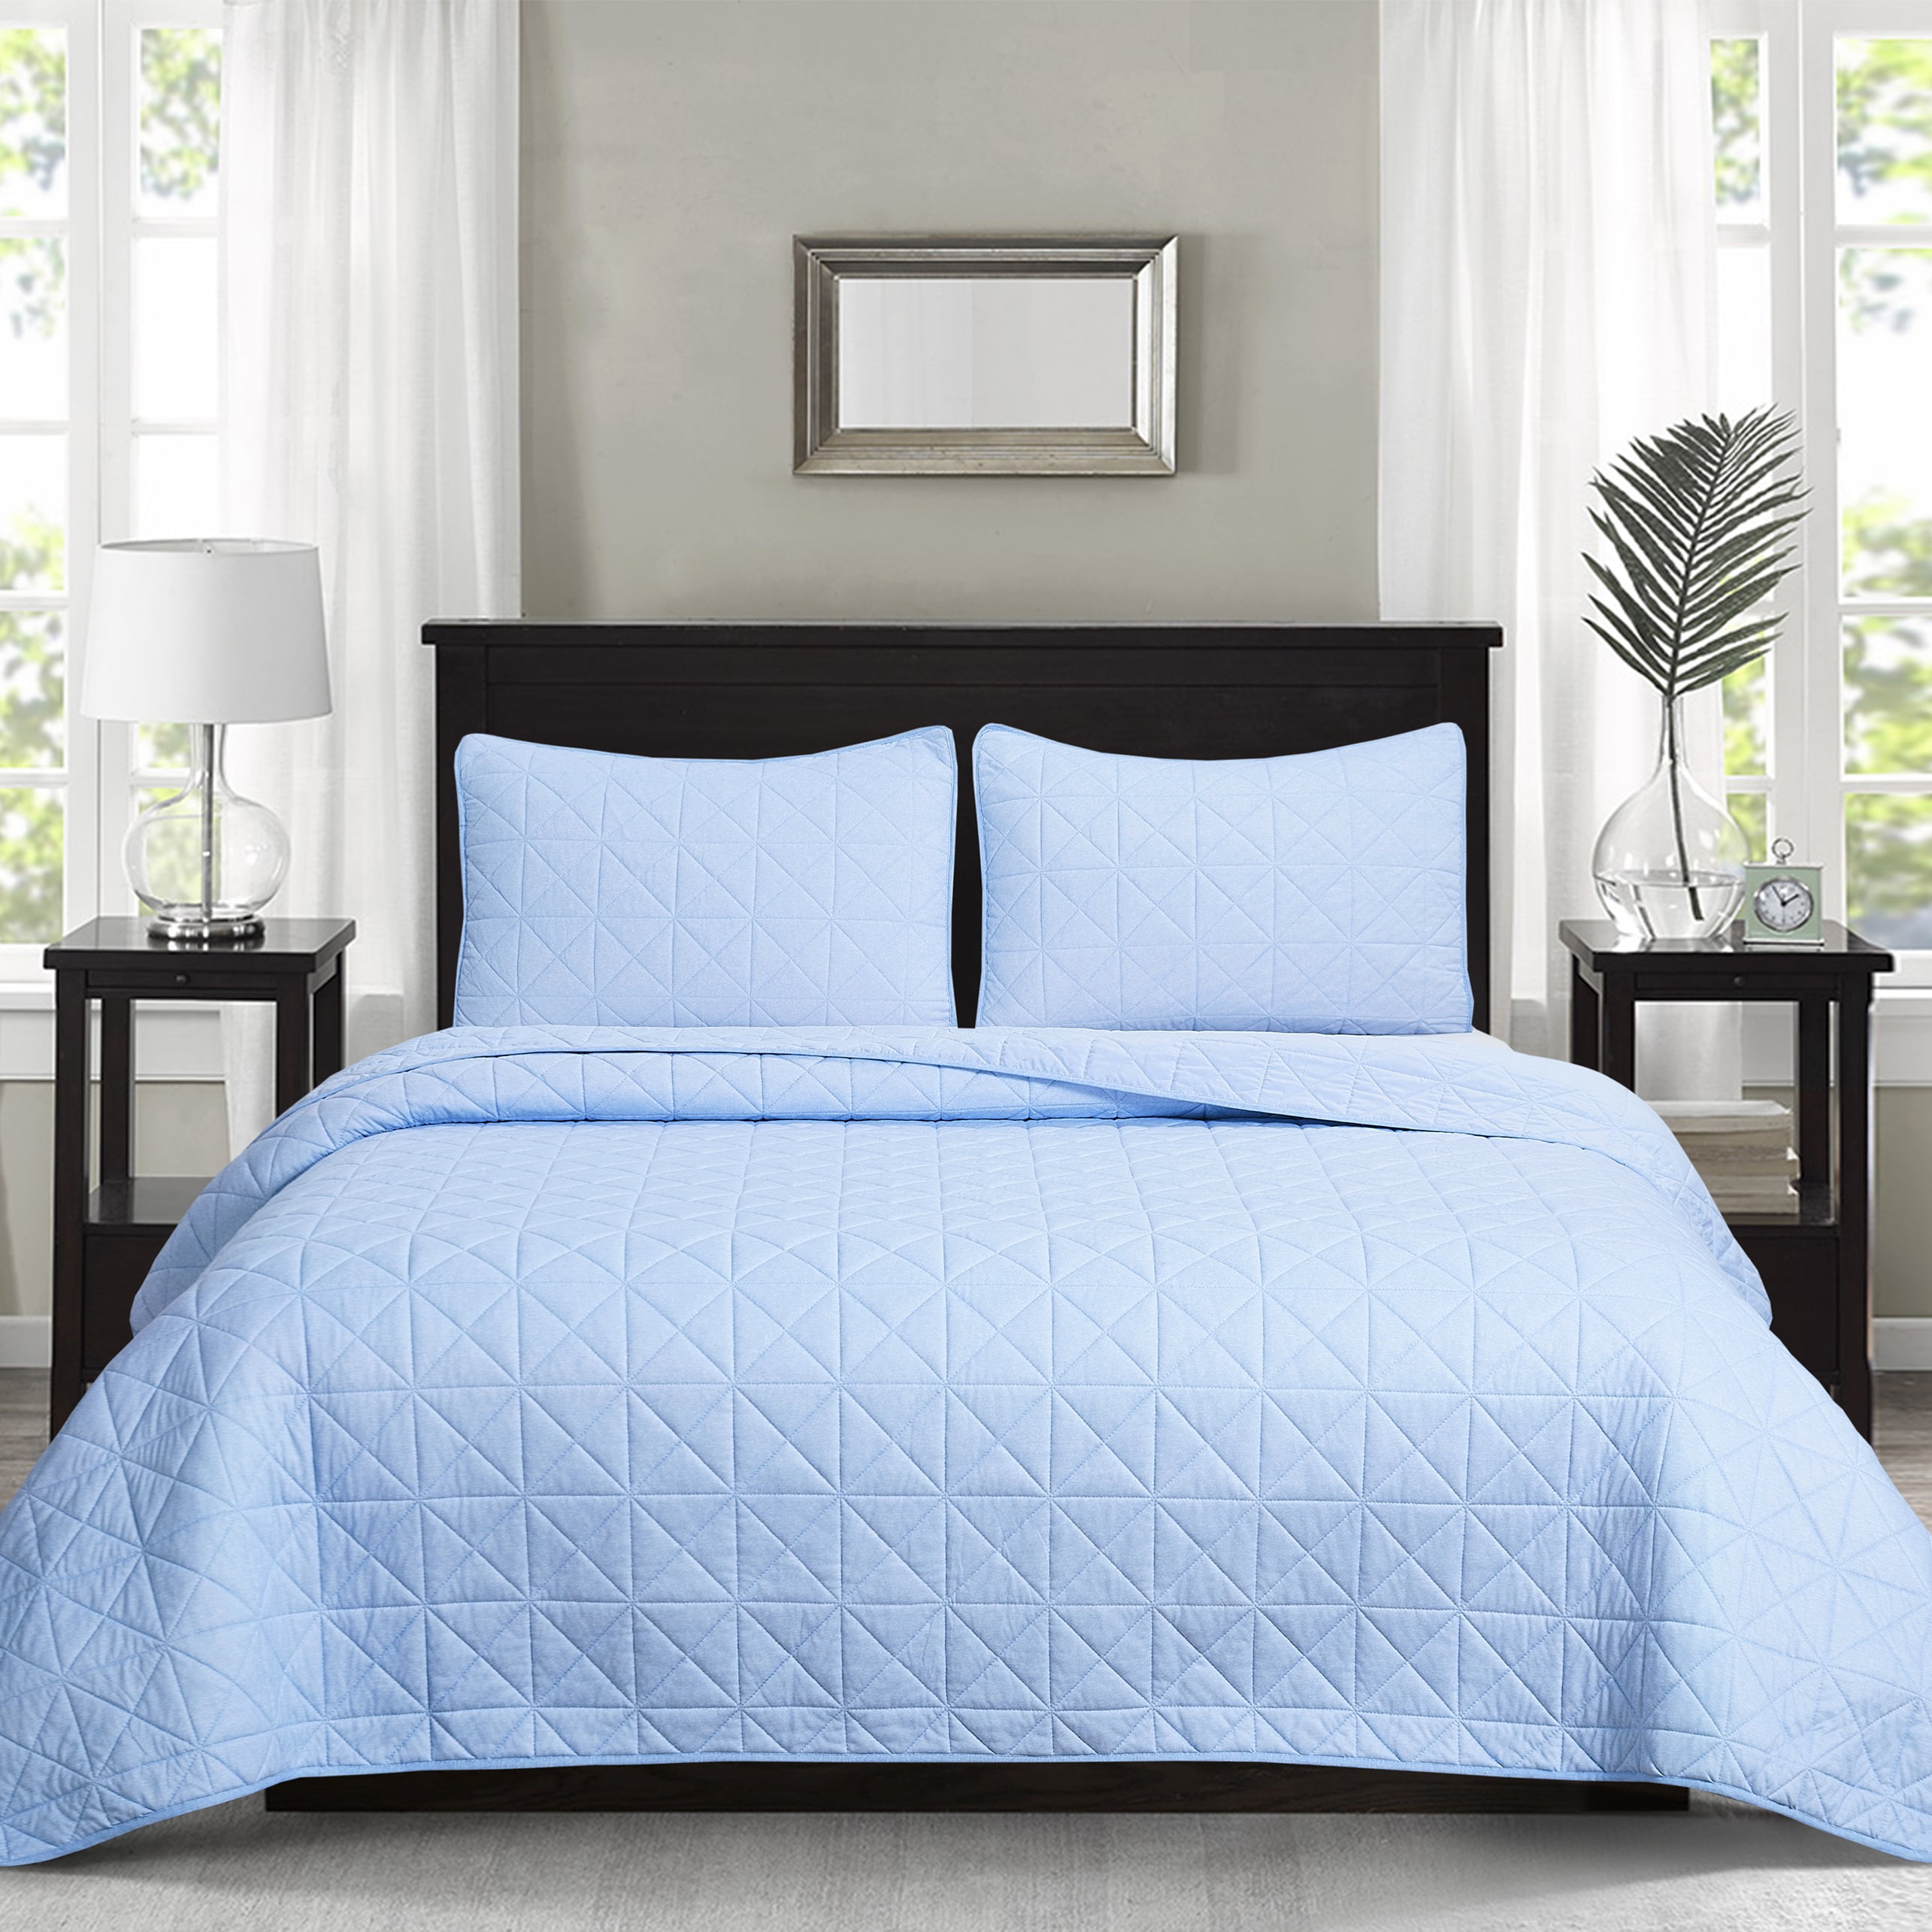 Chaps 3-Piece Jersey Knit Microfiber Quilt and Sham Set - Solid